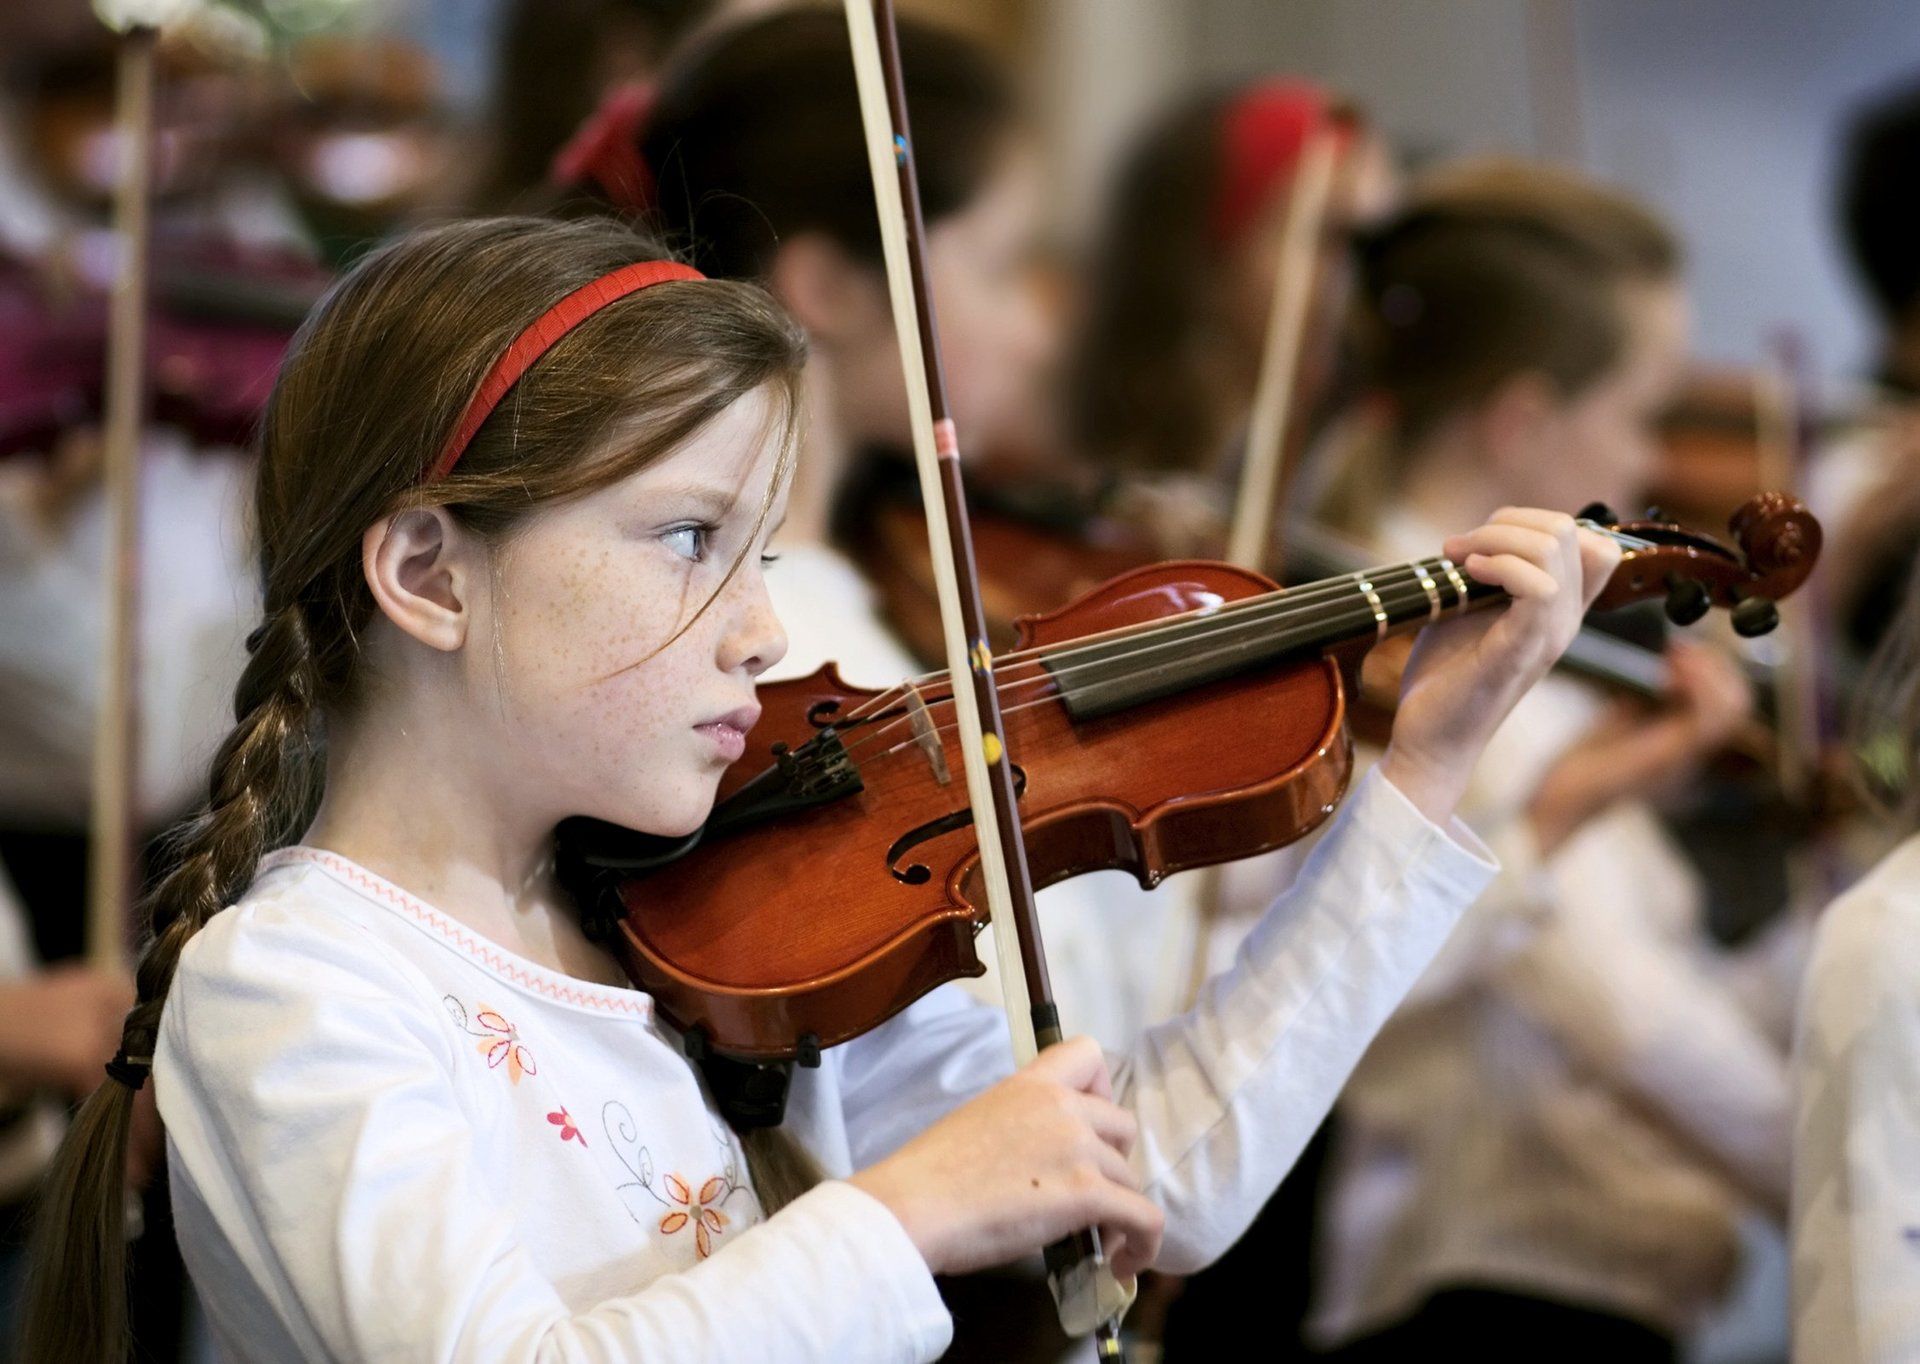 Young girl playing the violin in an orchestra.